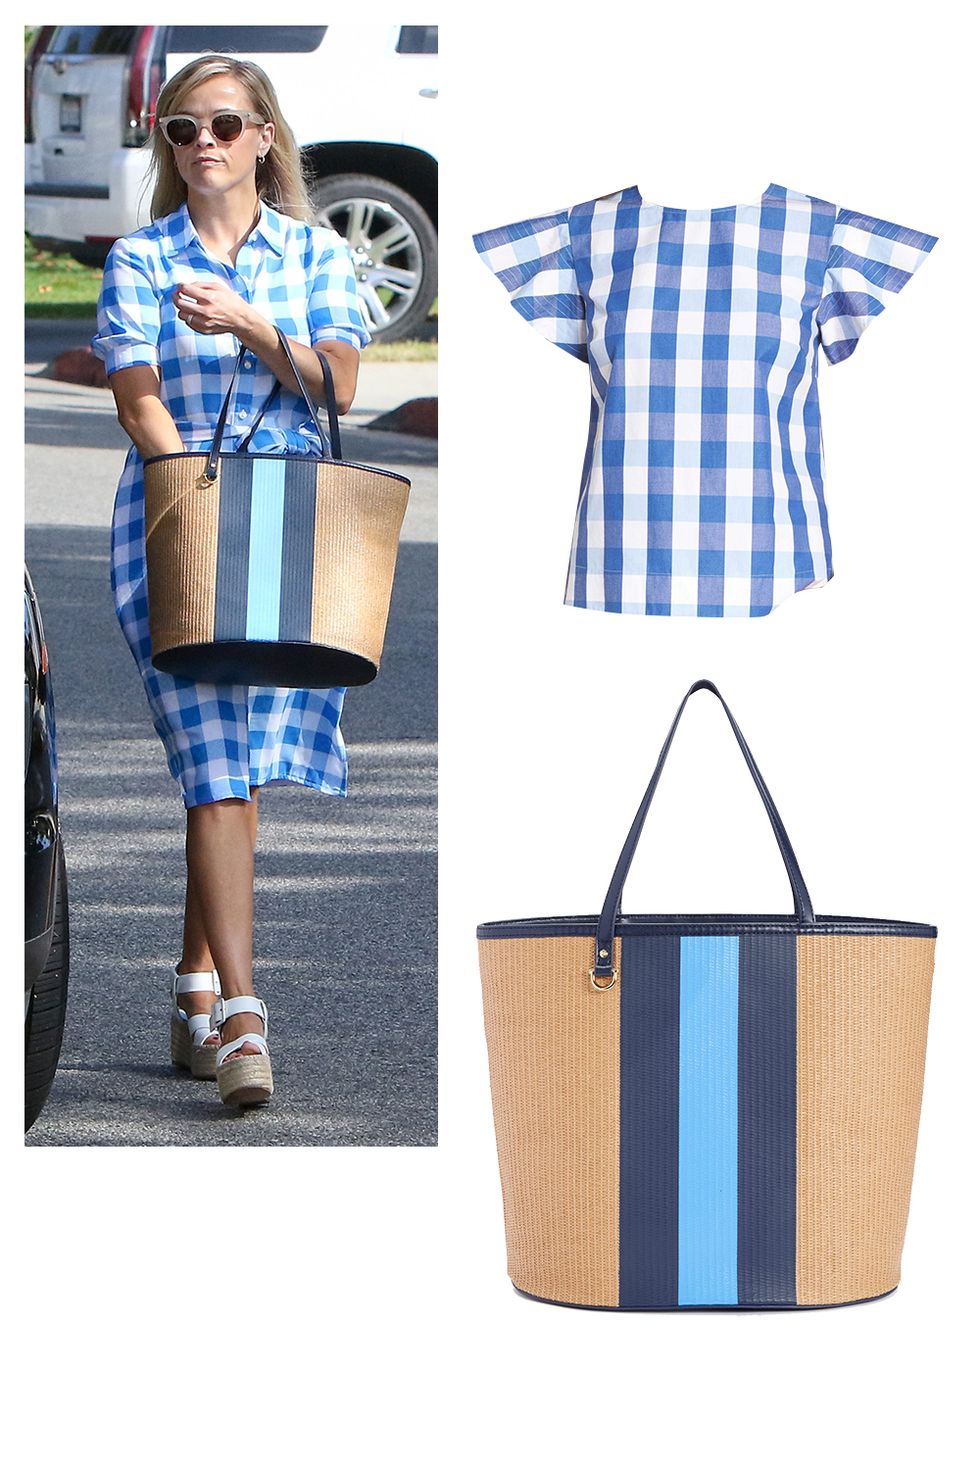 <p>Draper James Cloister Gingham Cotton Top, $150;&nbsp;<a href="http://shop.nordstrom.com/s/draper-james-cloister-gingham-cotton-top-nordstrom-exclusive/4636461?origin=category-personalizedsort&amp;fashioncolor=BLUE%20PARTON%20CHECK" target="_blank" data-tracking-id="recirc-text-link">nordstrom.com</a></p><p>Draper James Stripe Straw Tote, $165;&nbsp;<a href="https://www.draperjames.com/stripe-straw-tote" target="_blank" data-tracking-id="recirc-text-link">draperjames.com</a></p>